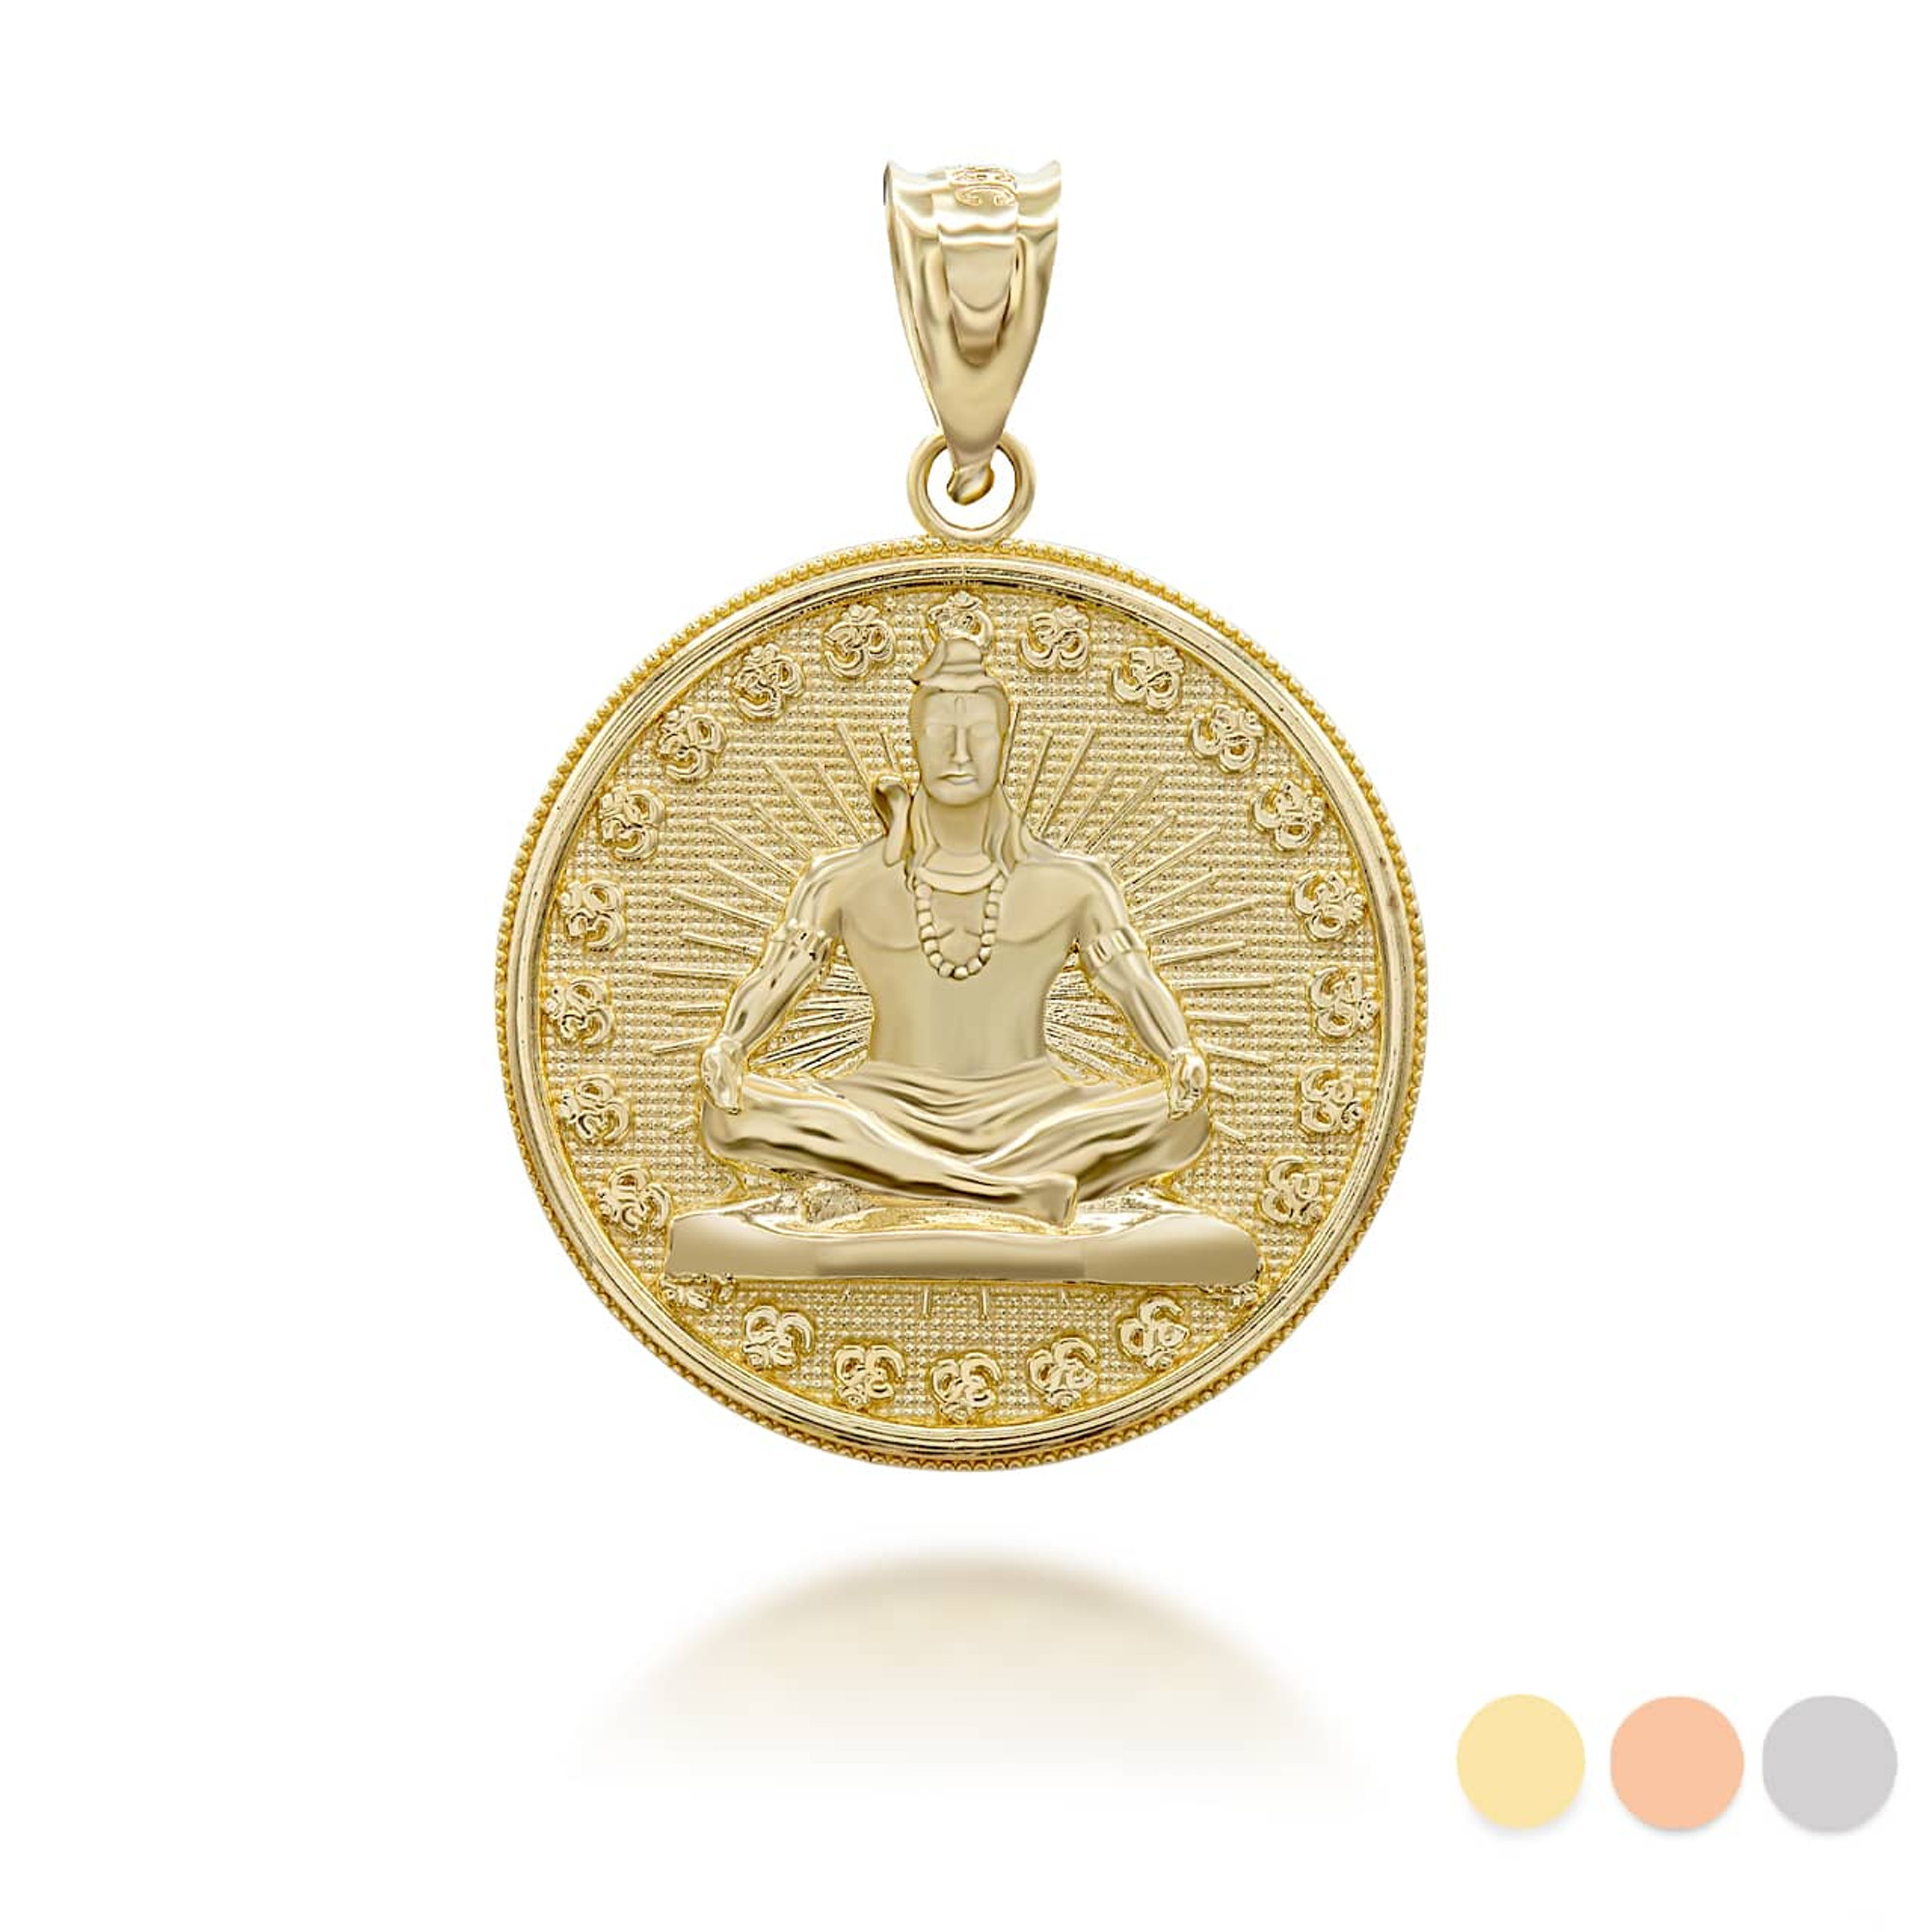 Gold Lord Shiva Hindu Coin Pendant Necklace - Factory Direct Jewelry